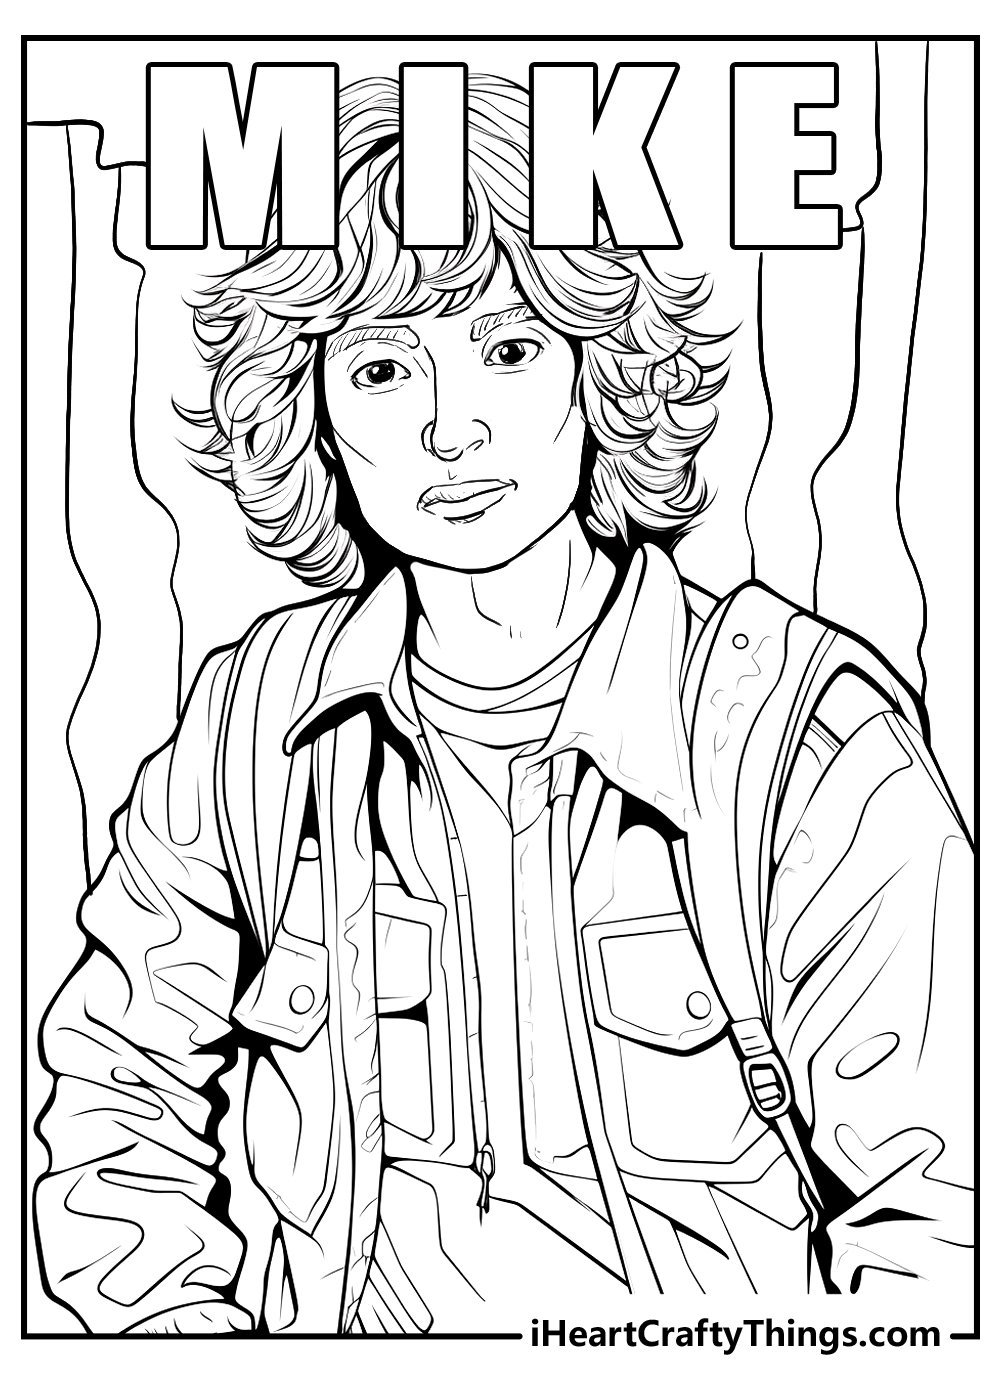 mike from stranger things coloring pages